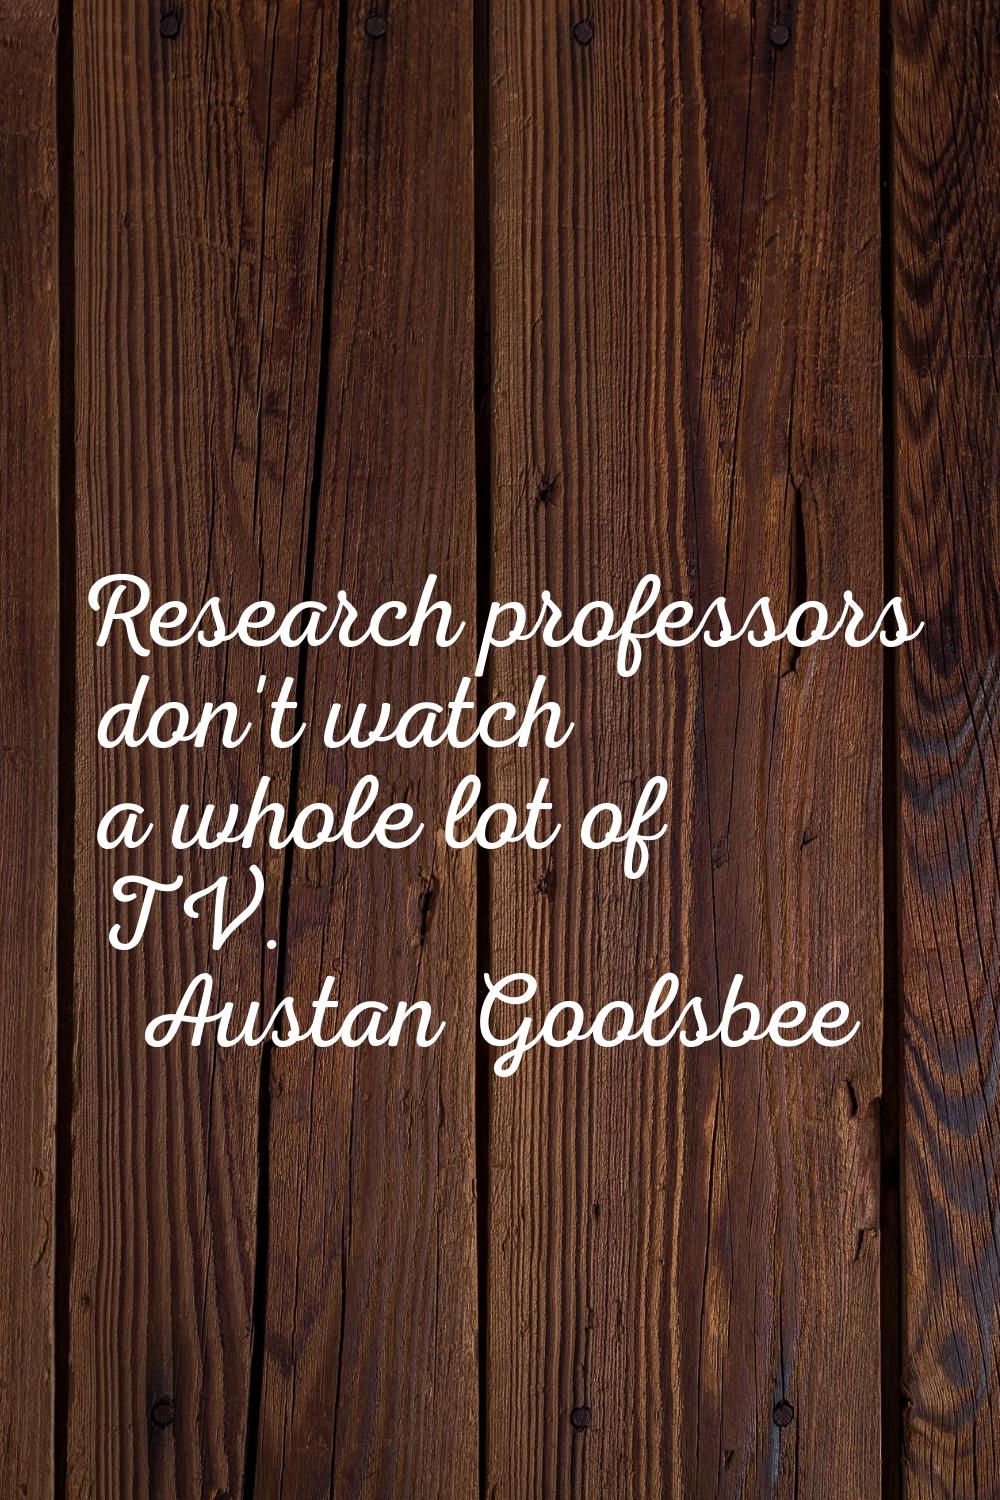 Research professors don't watch a whole lot of TV.